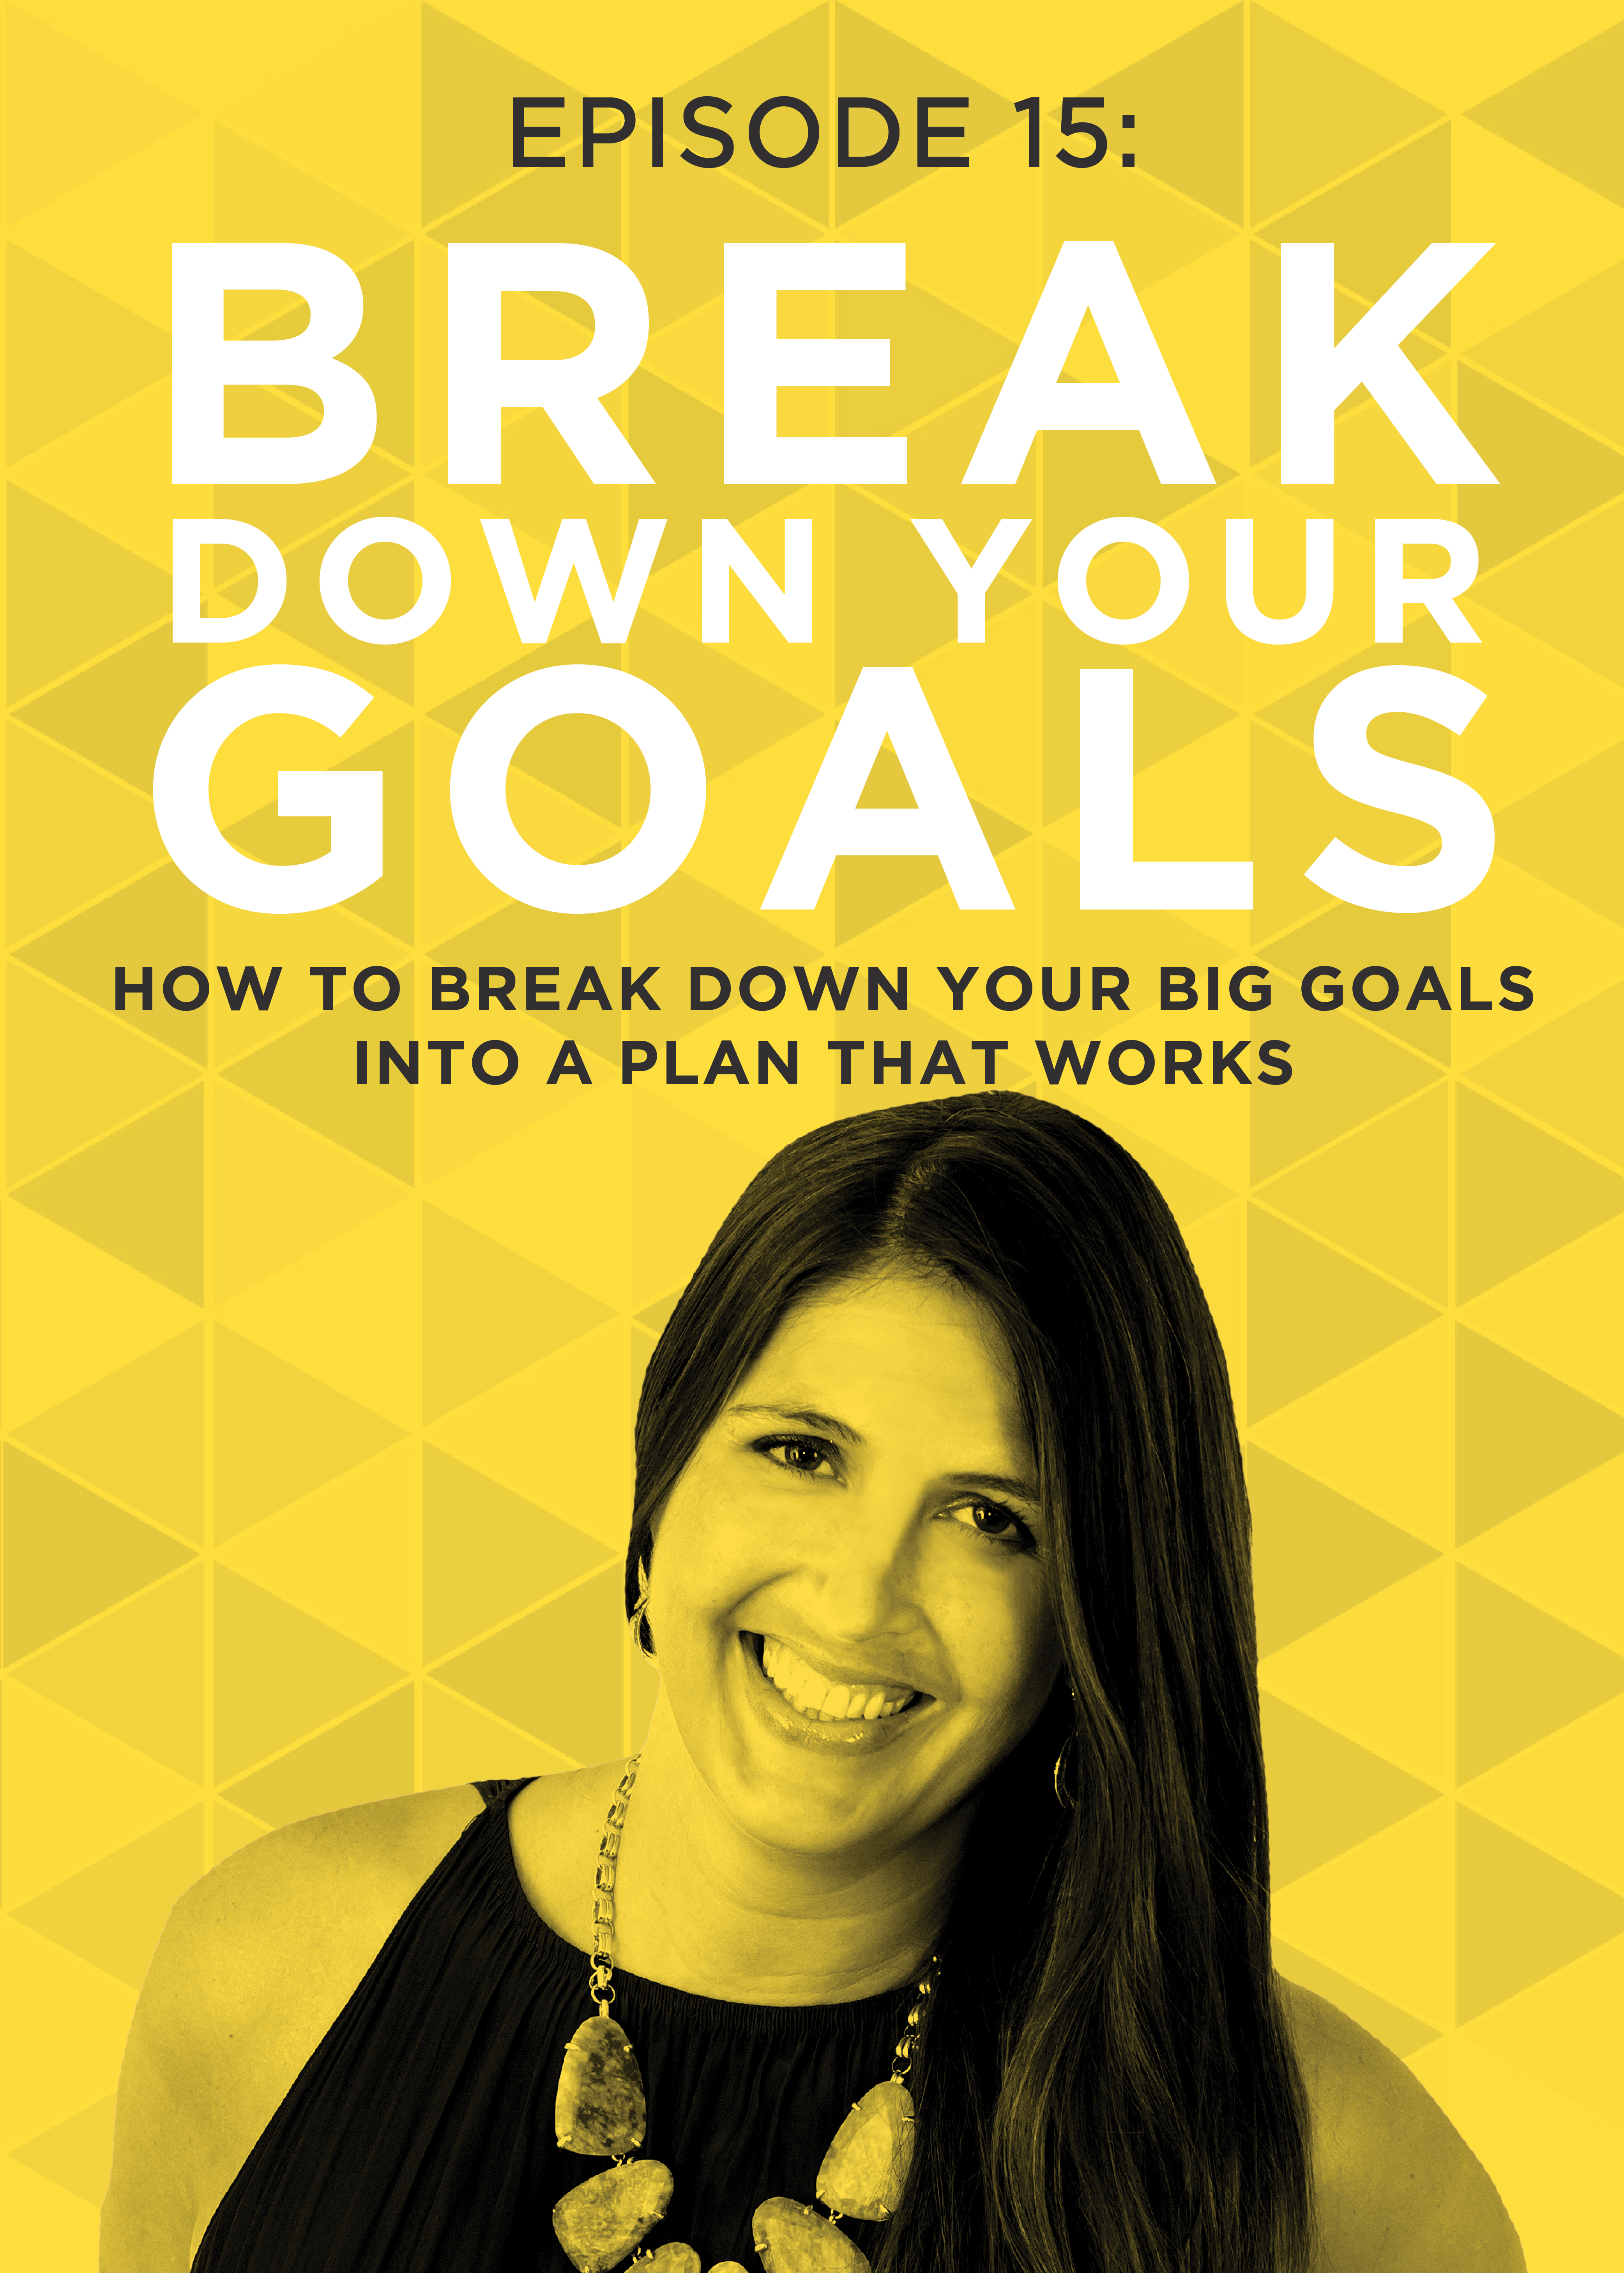 Feeling overwhelmed with everything there is to do, all the time? Ruth shares some super practical tips for how to break down your biggest goals into a working action plan that actually helps you to get things done and gets you to where you want to go. #doitscaredpocast #ruthsoukup #doitscaredmovement #productivity #loveyourlife